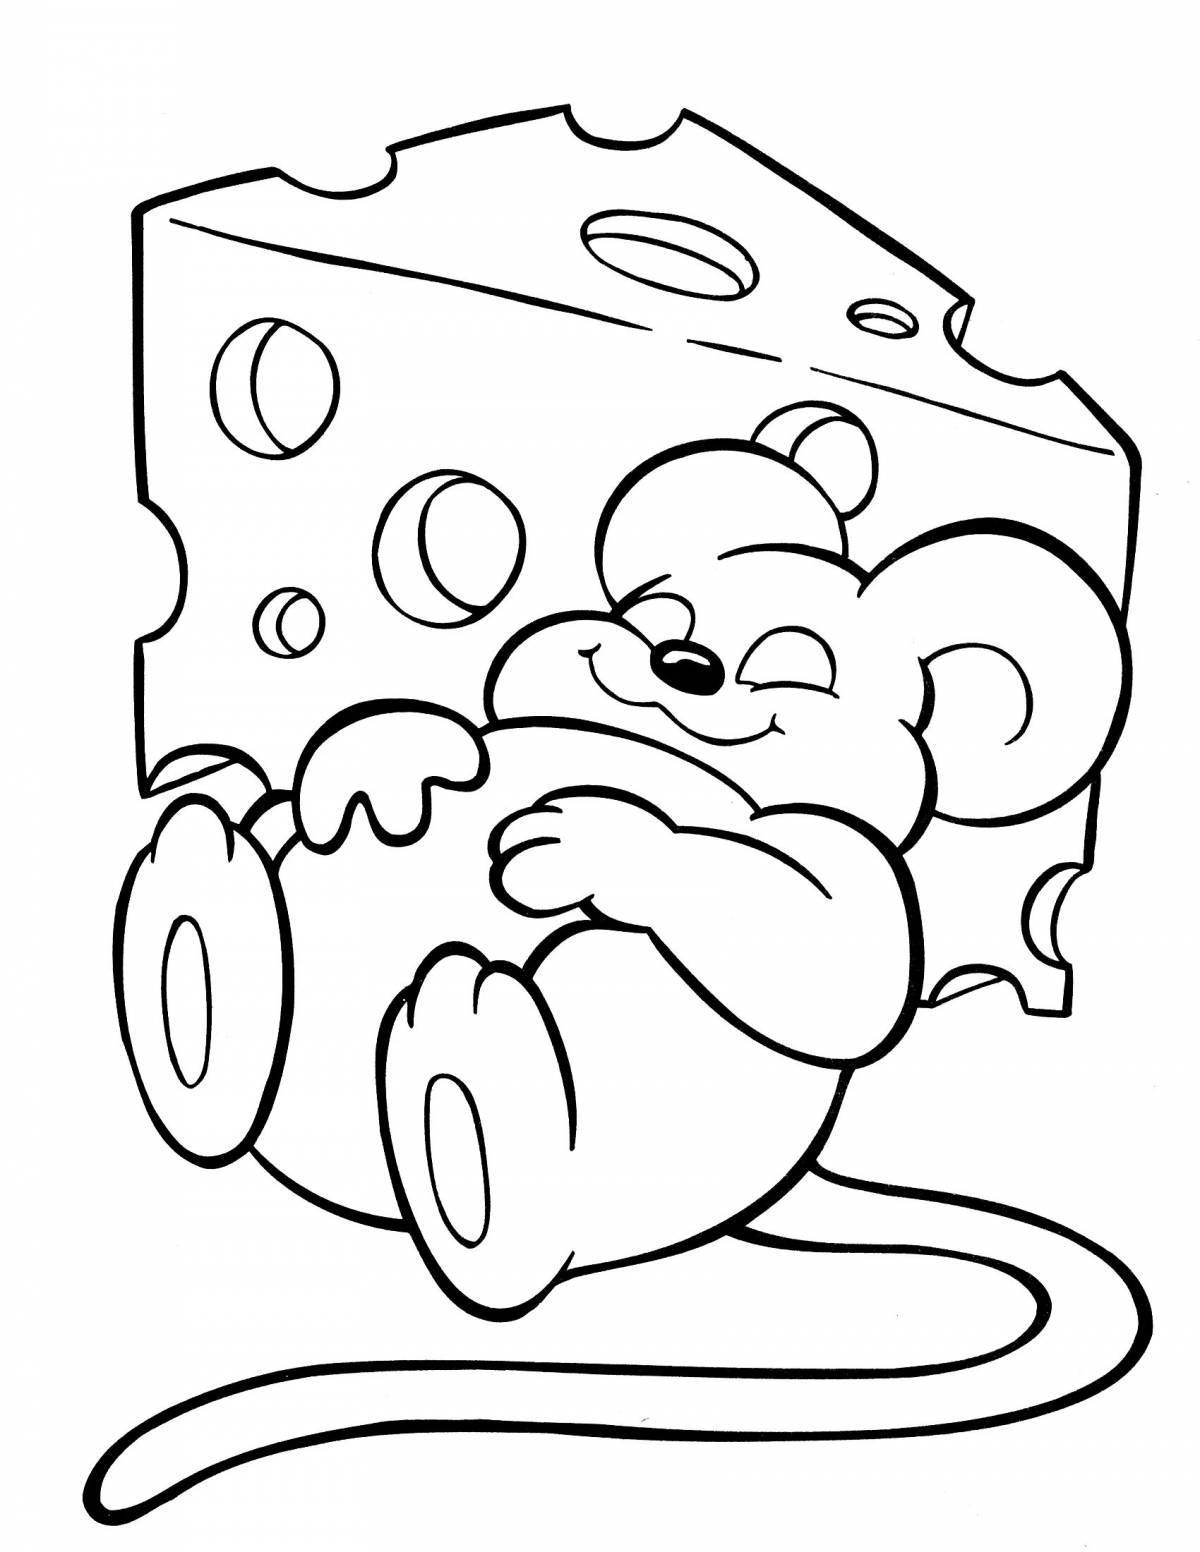 Coloring page mischievous little mouse with cheese